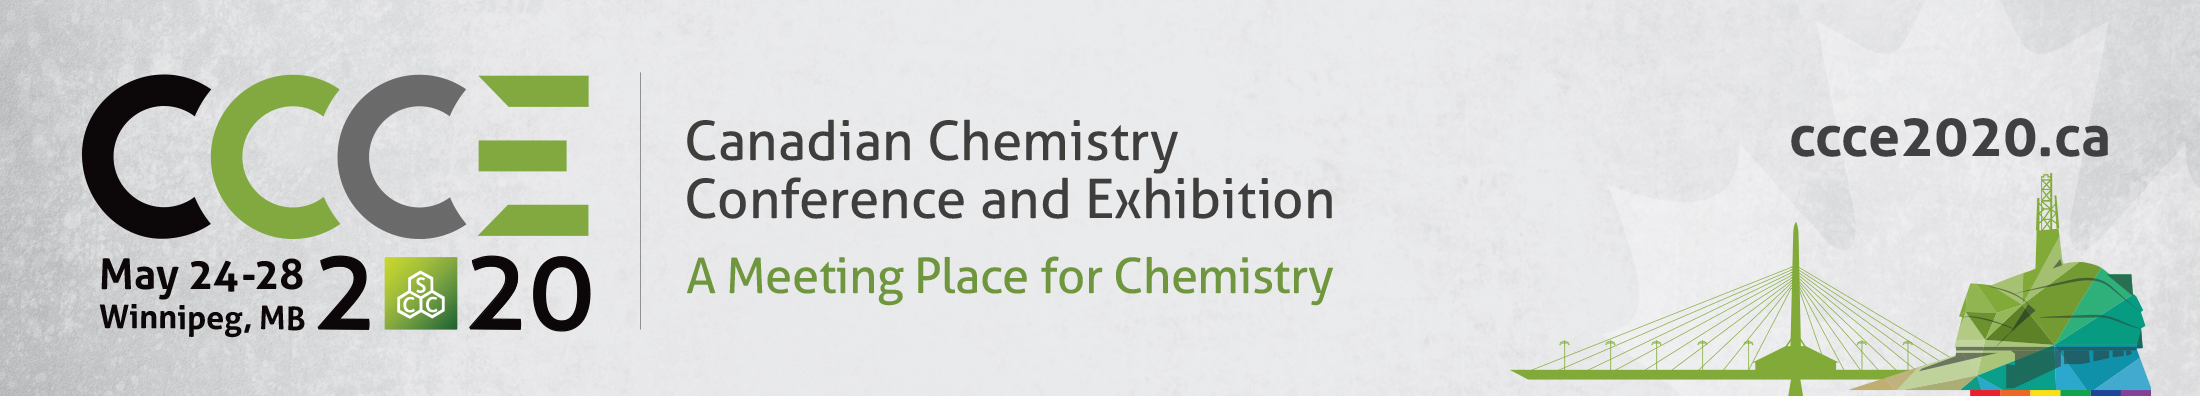 Canadian Chemistry Conference and Exhibition